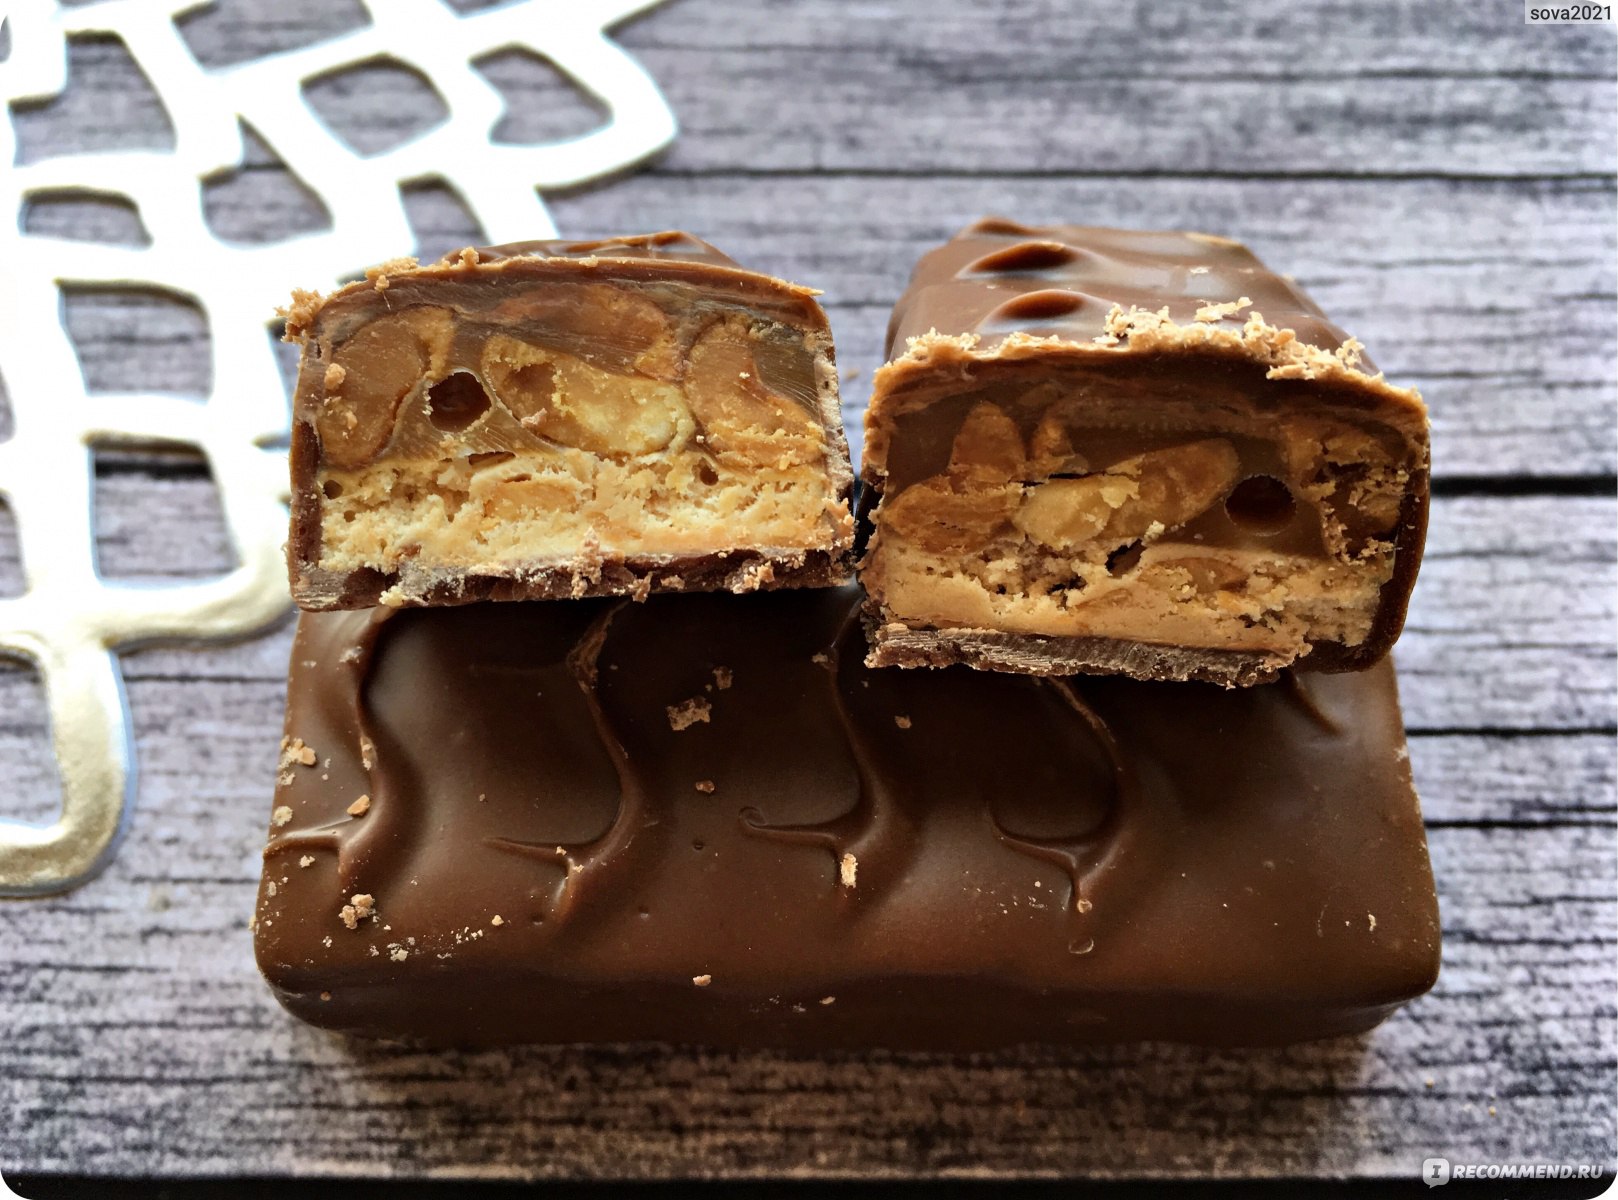 Snickers Caramel Cacao 340